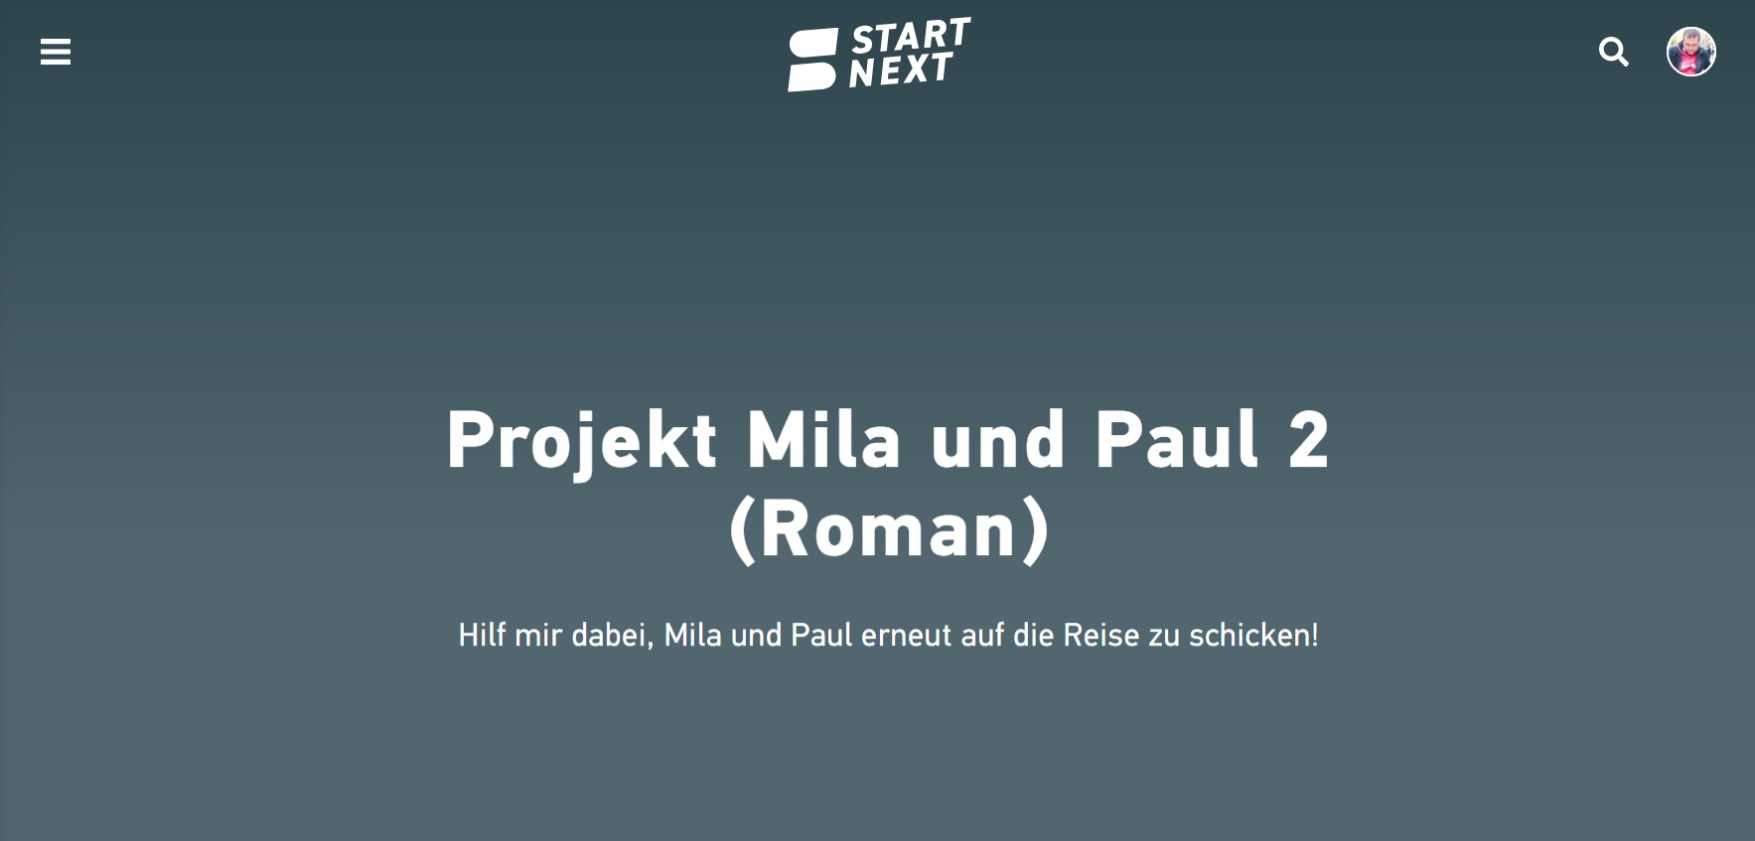 You are currently viewing Projekt Mila und Paul 2 auf Startnext